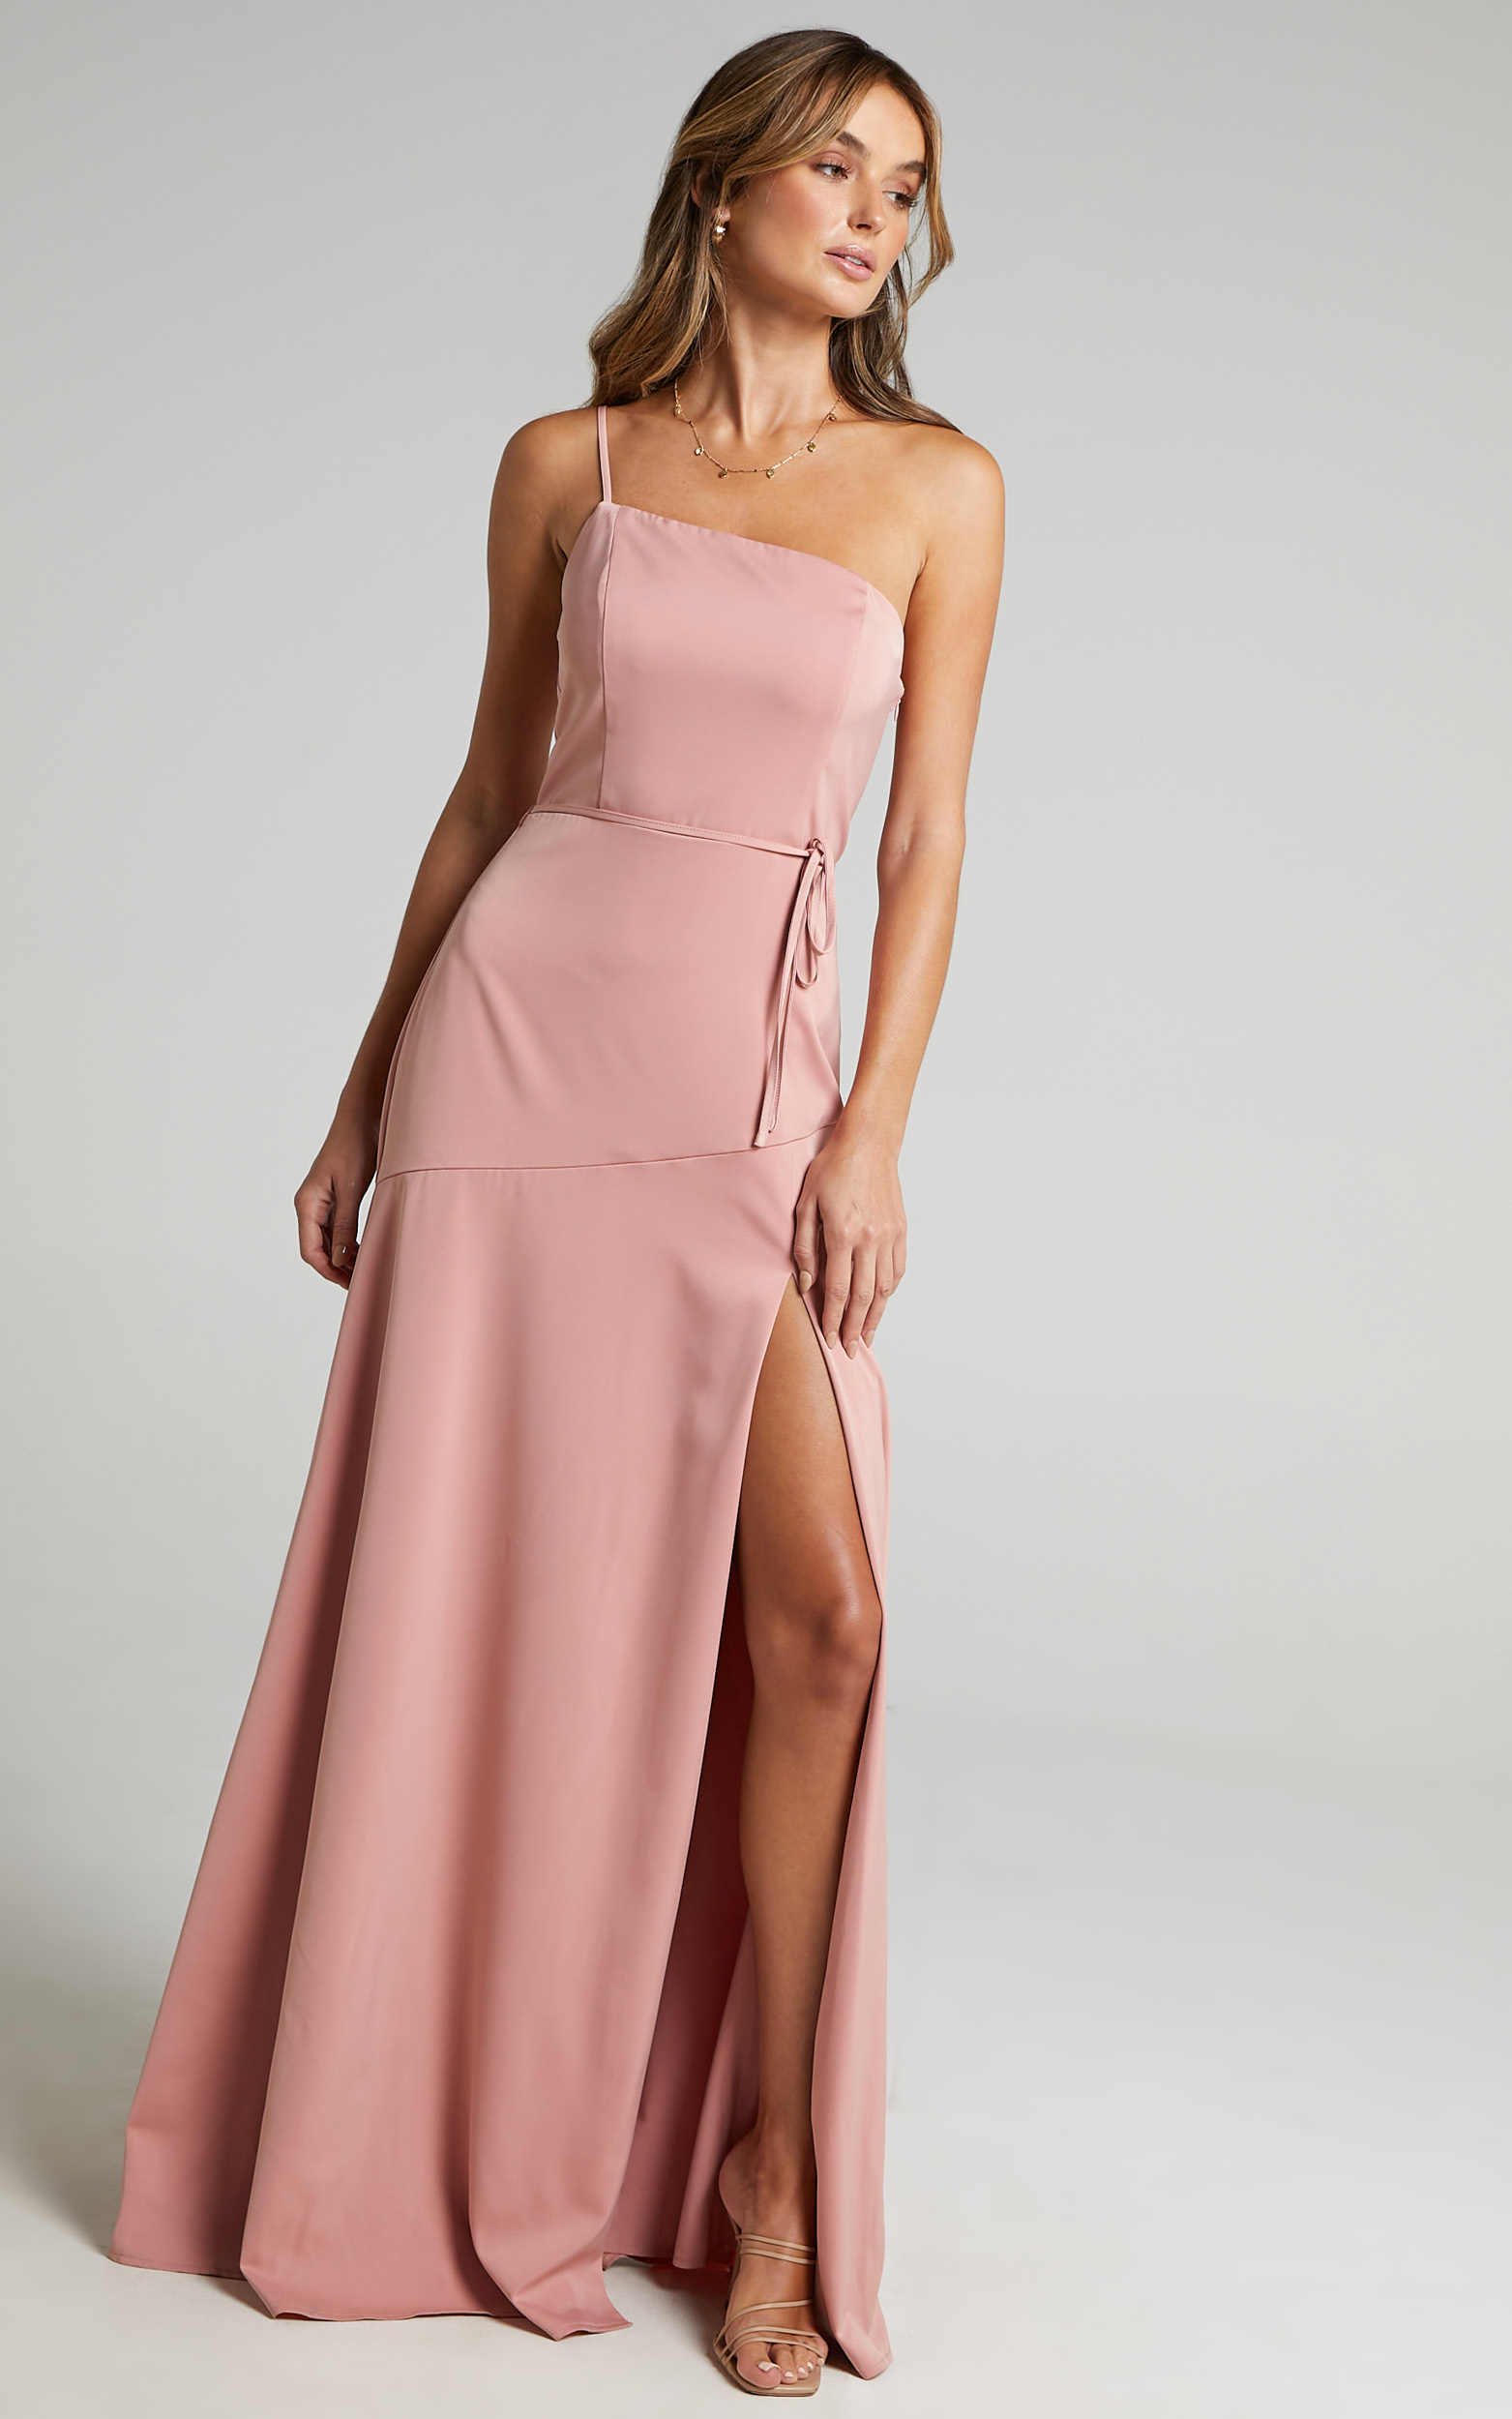 Find Your Tribe Dress in Peach Satin - 06, ORG1, hi-res image number null